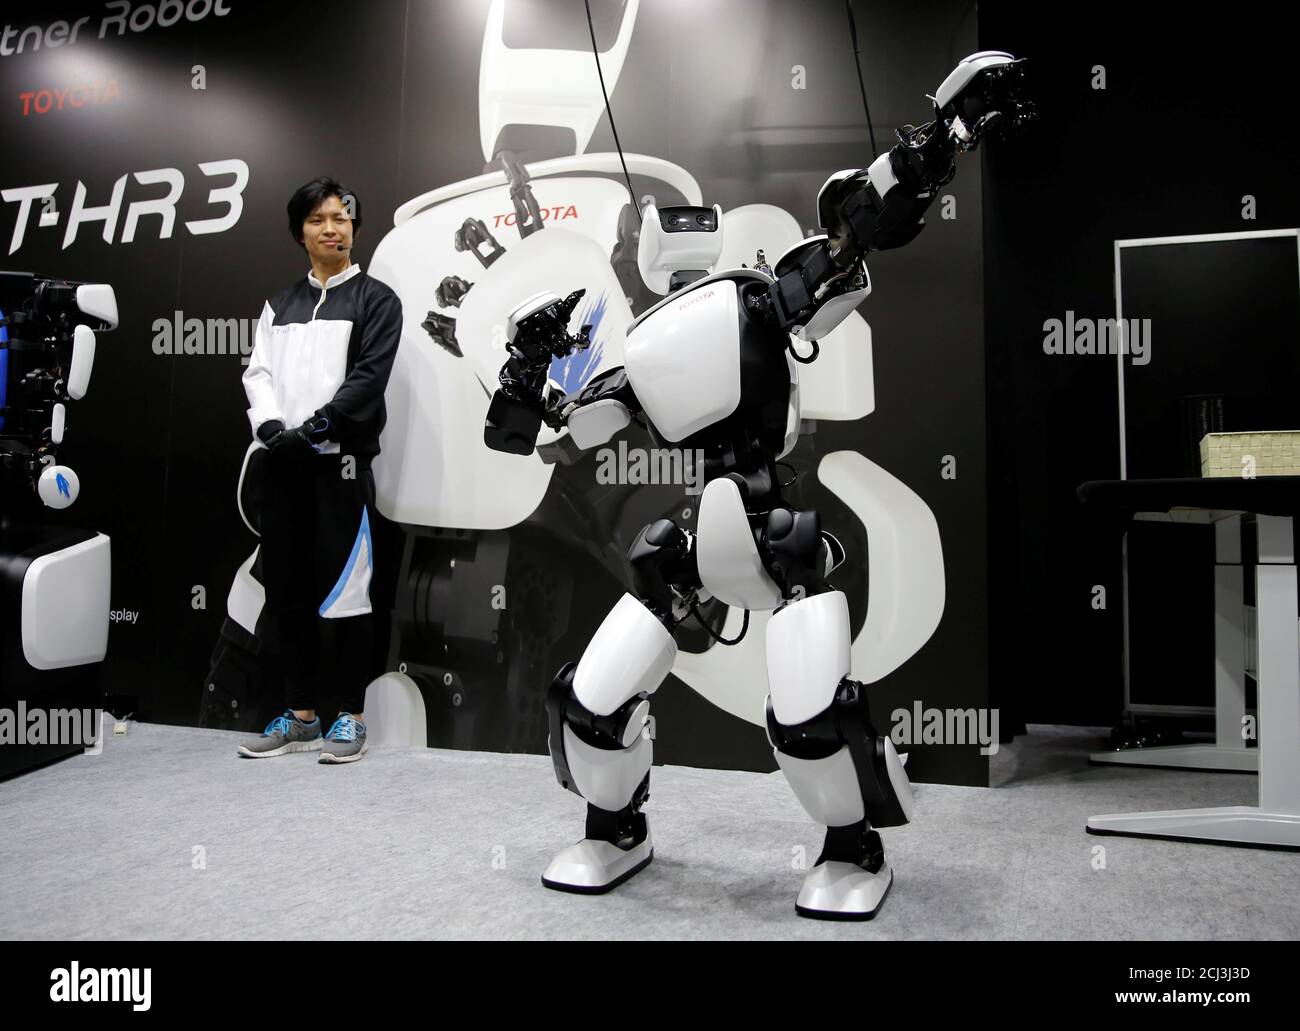 Toyota Motor Corp's third generation humanoid robot, T-HR3 is seen during  its demonstration at the International Robot Exhibition 2017 in Tokyo,  Japan, November 29, 2017. REUTERS/Toru Hanai Stock Photo - Alamy